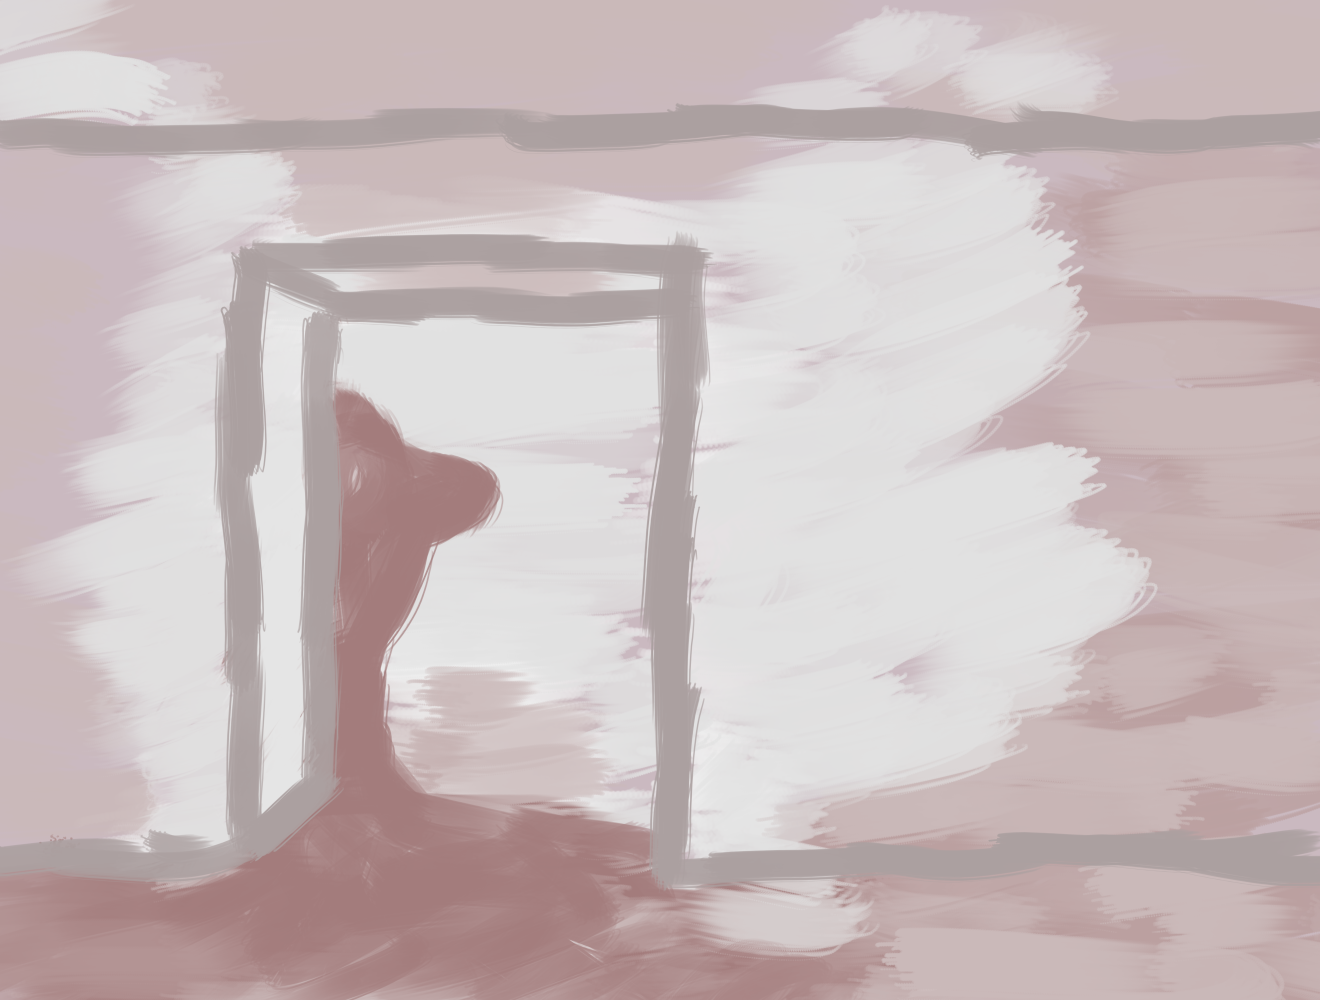 A digital painting. It's a hazy doorway formed with a shaky outline. The scene is colored and textured with the same haze. A creacher is coming into the doorway and spilling into the room.